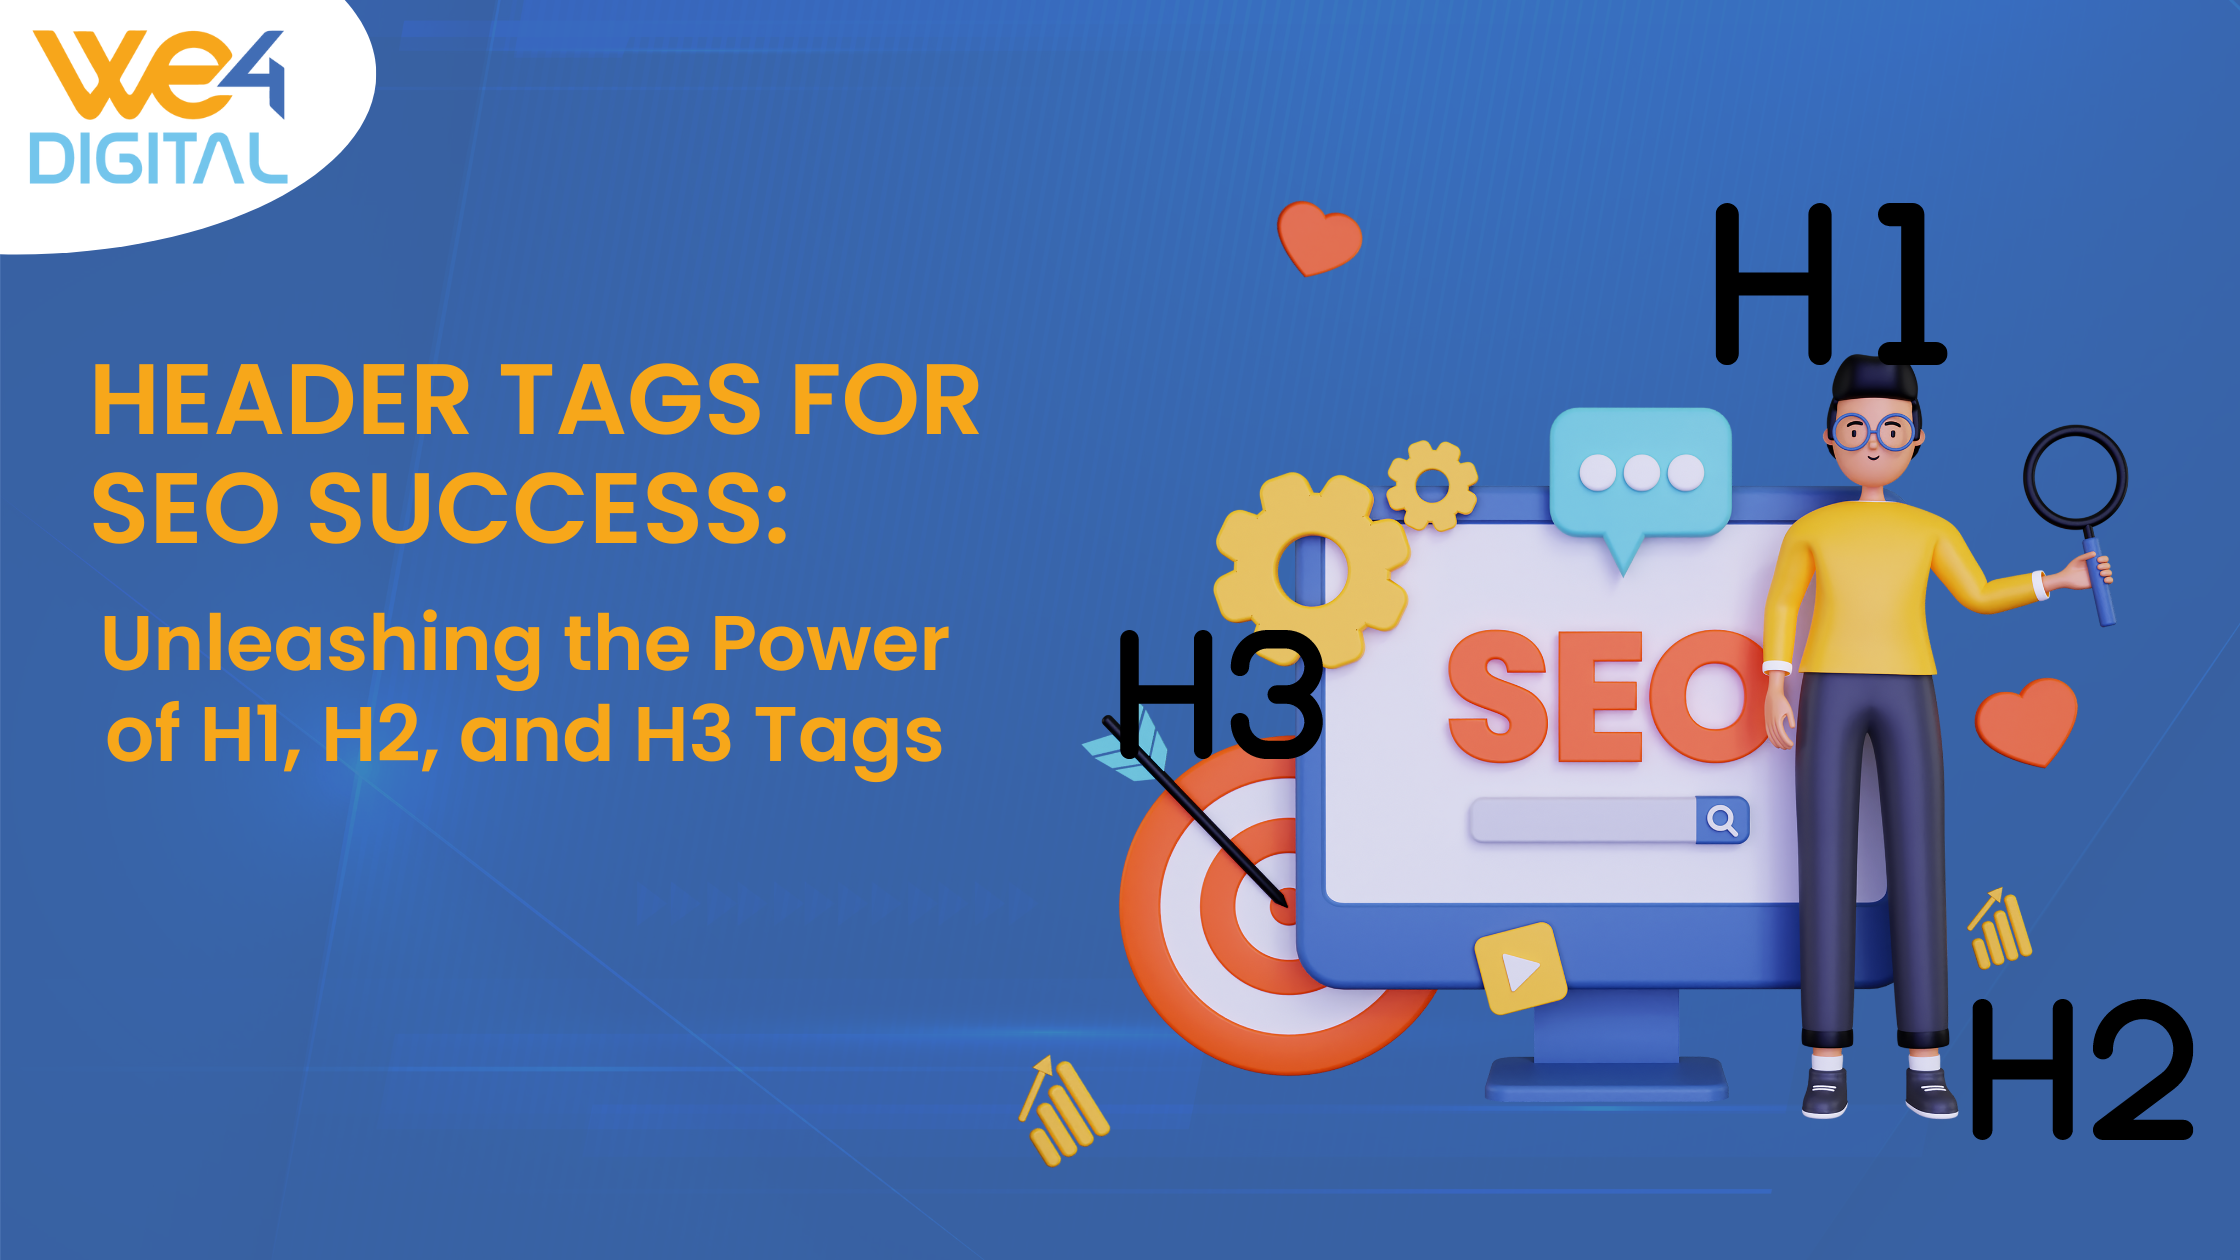 Header Tags for SEO Success: Unleashing the Power of H1, H2, and H3 Tags - We4digital